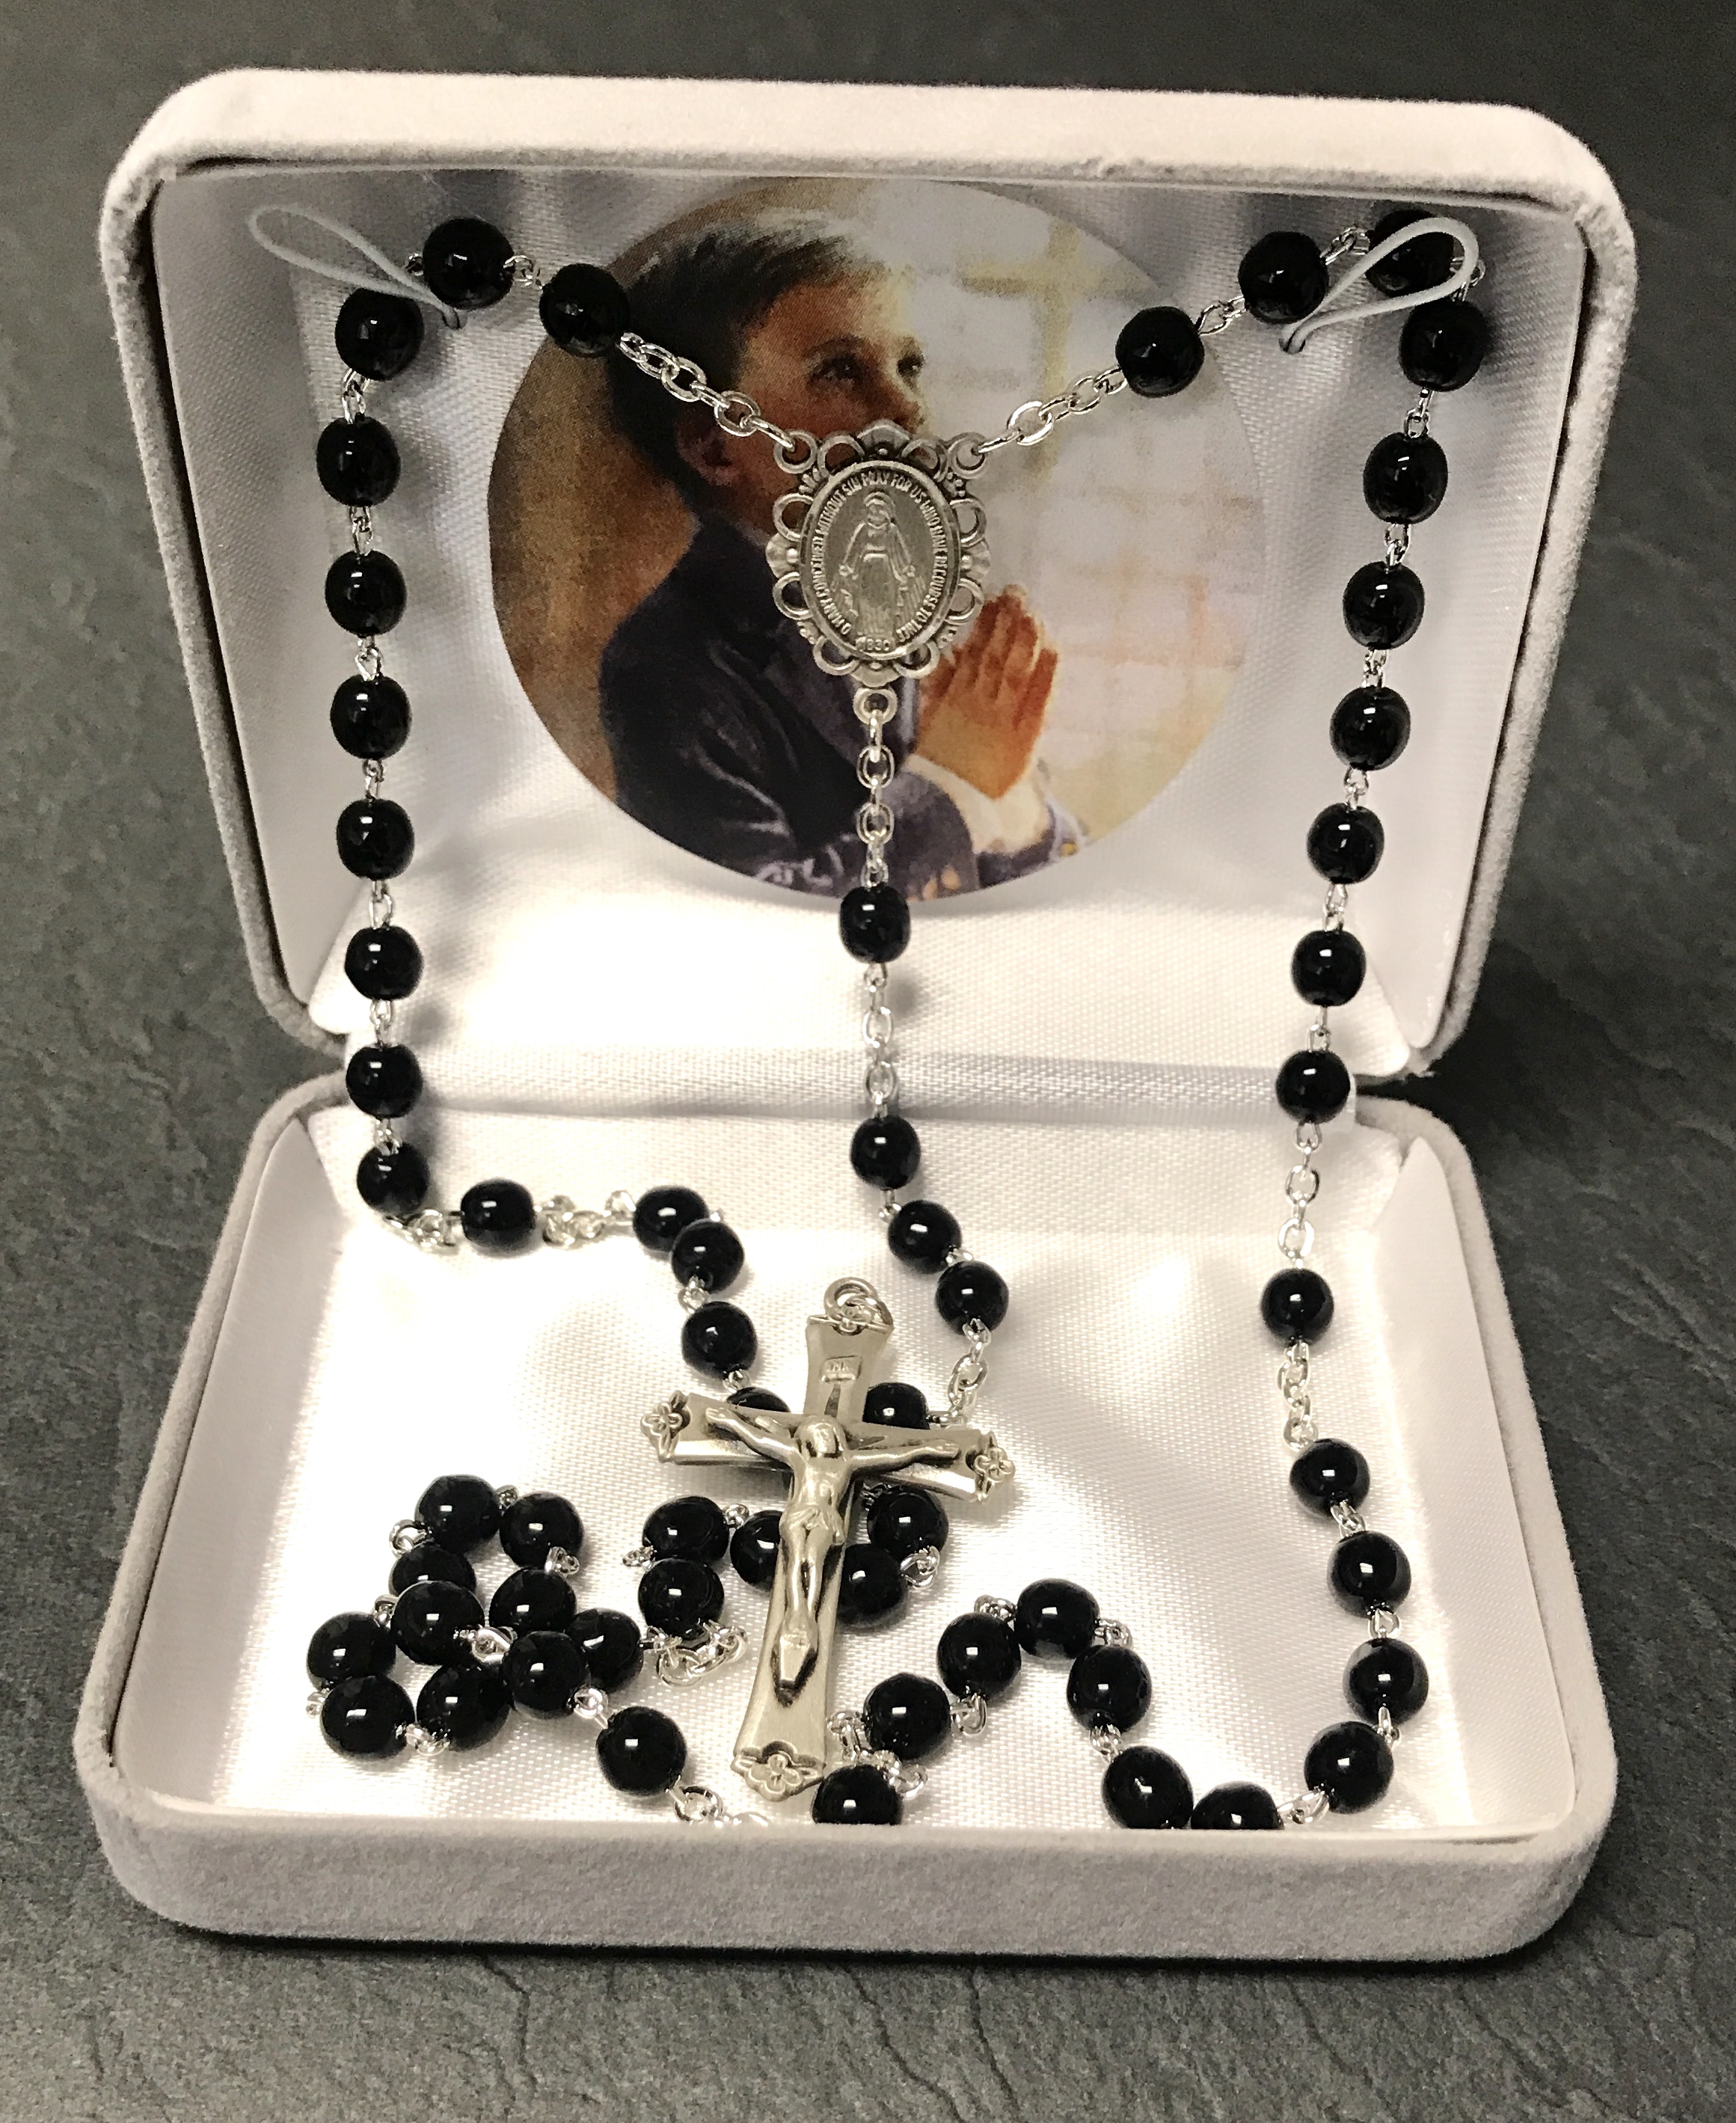 5mm BLACK STERLING SILVER WIRE & CHAIN FC ROSARY GIFT BOXED